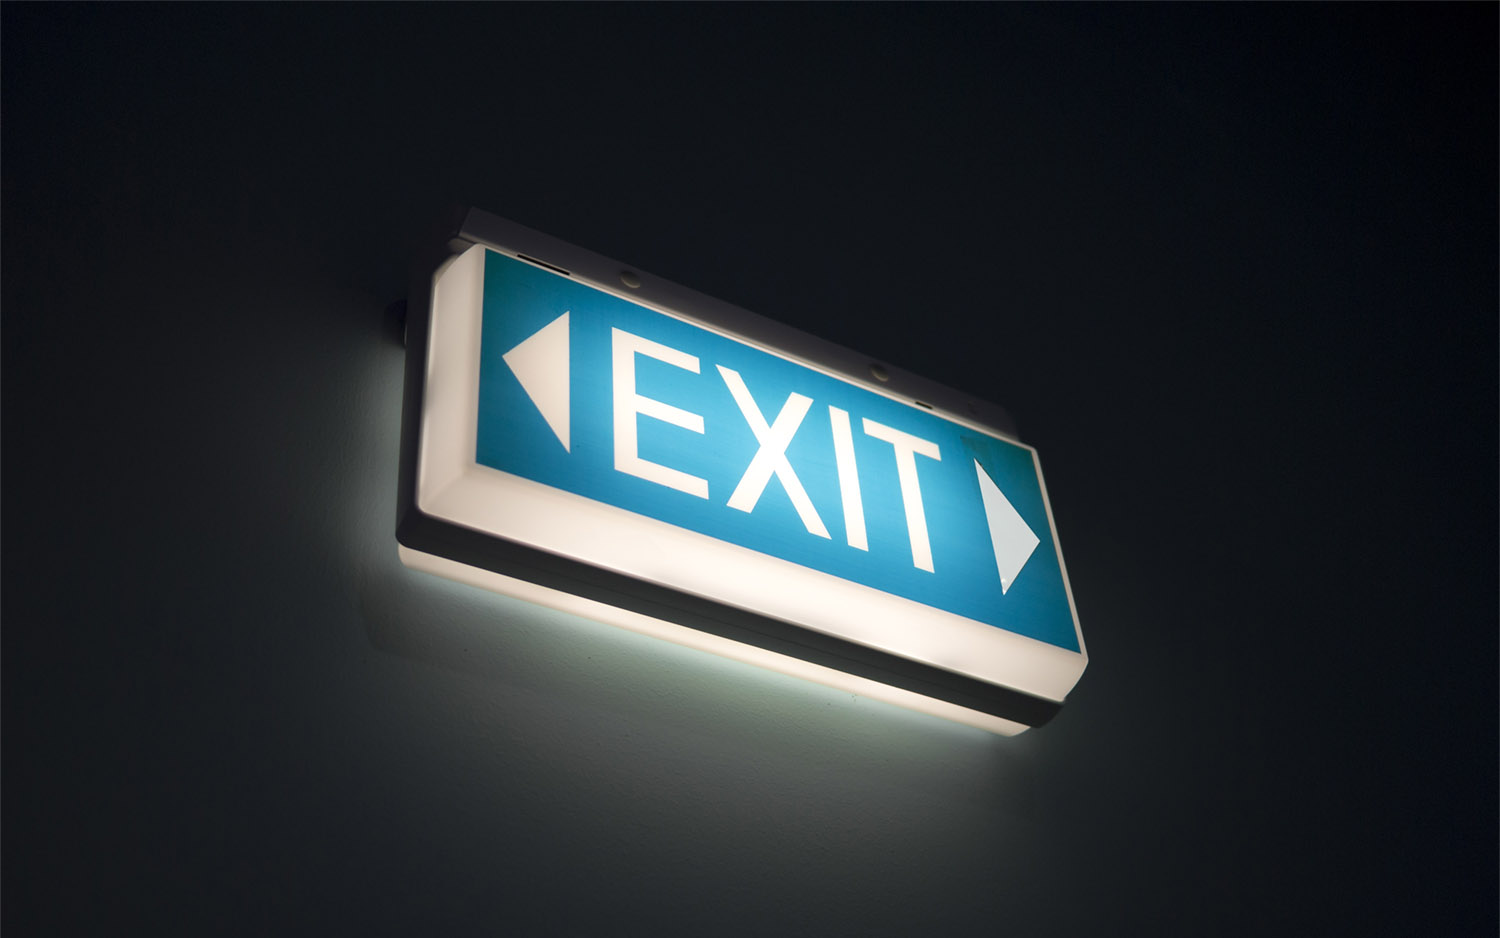 An image of a glowing exit sign